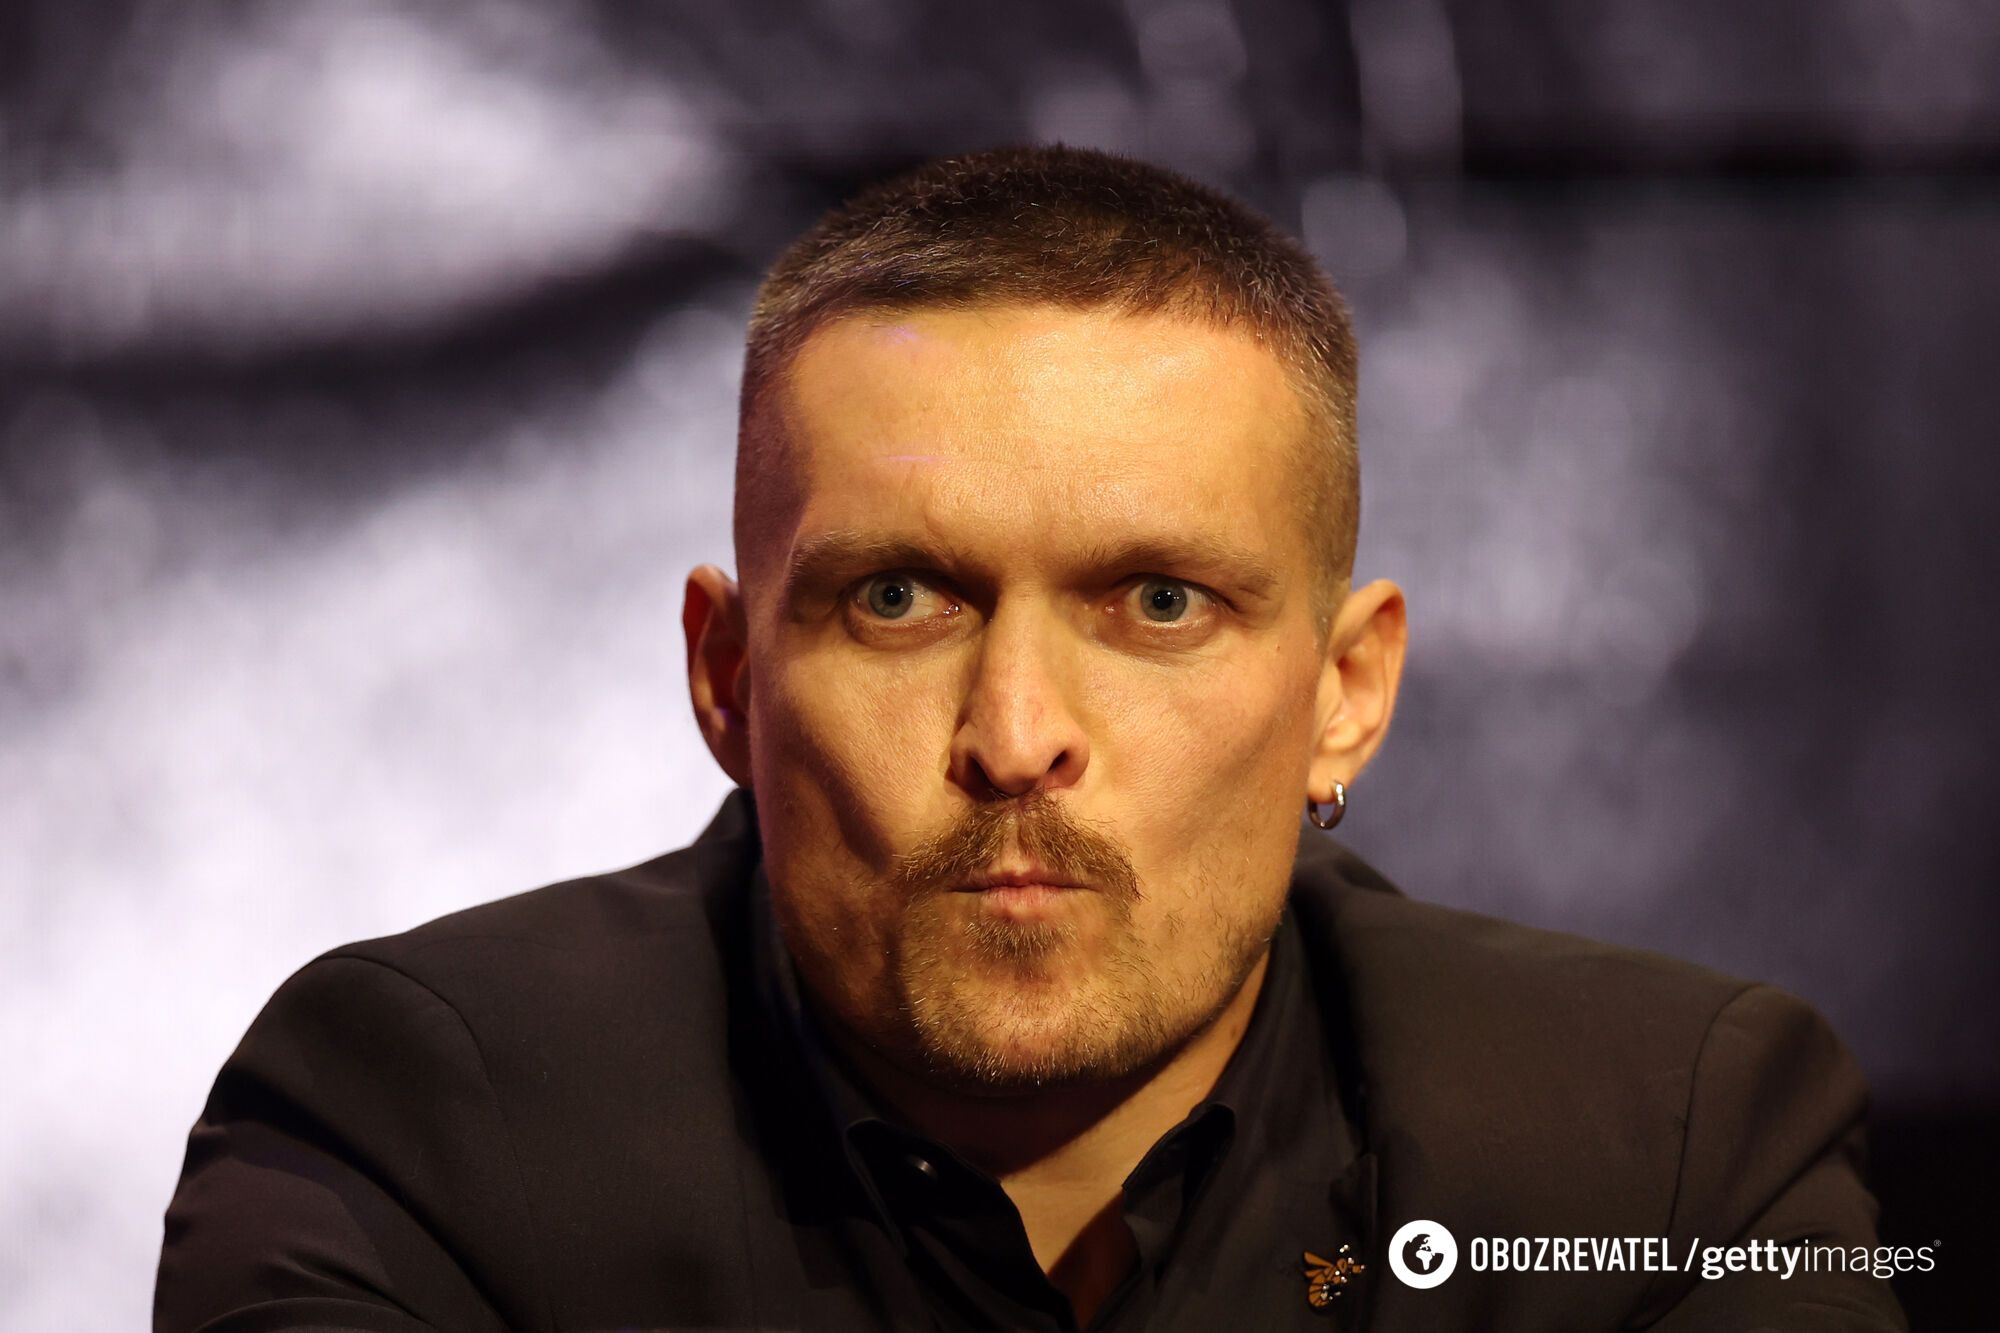 Usyk answered the question of whether he was ready to go to war against Russia and spoke about his dead friends